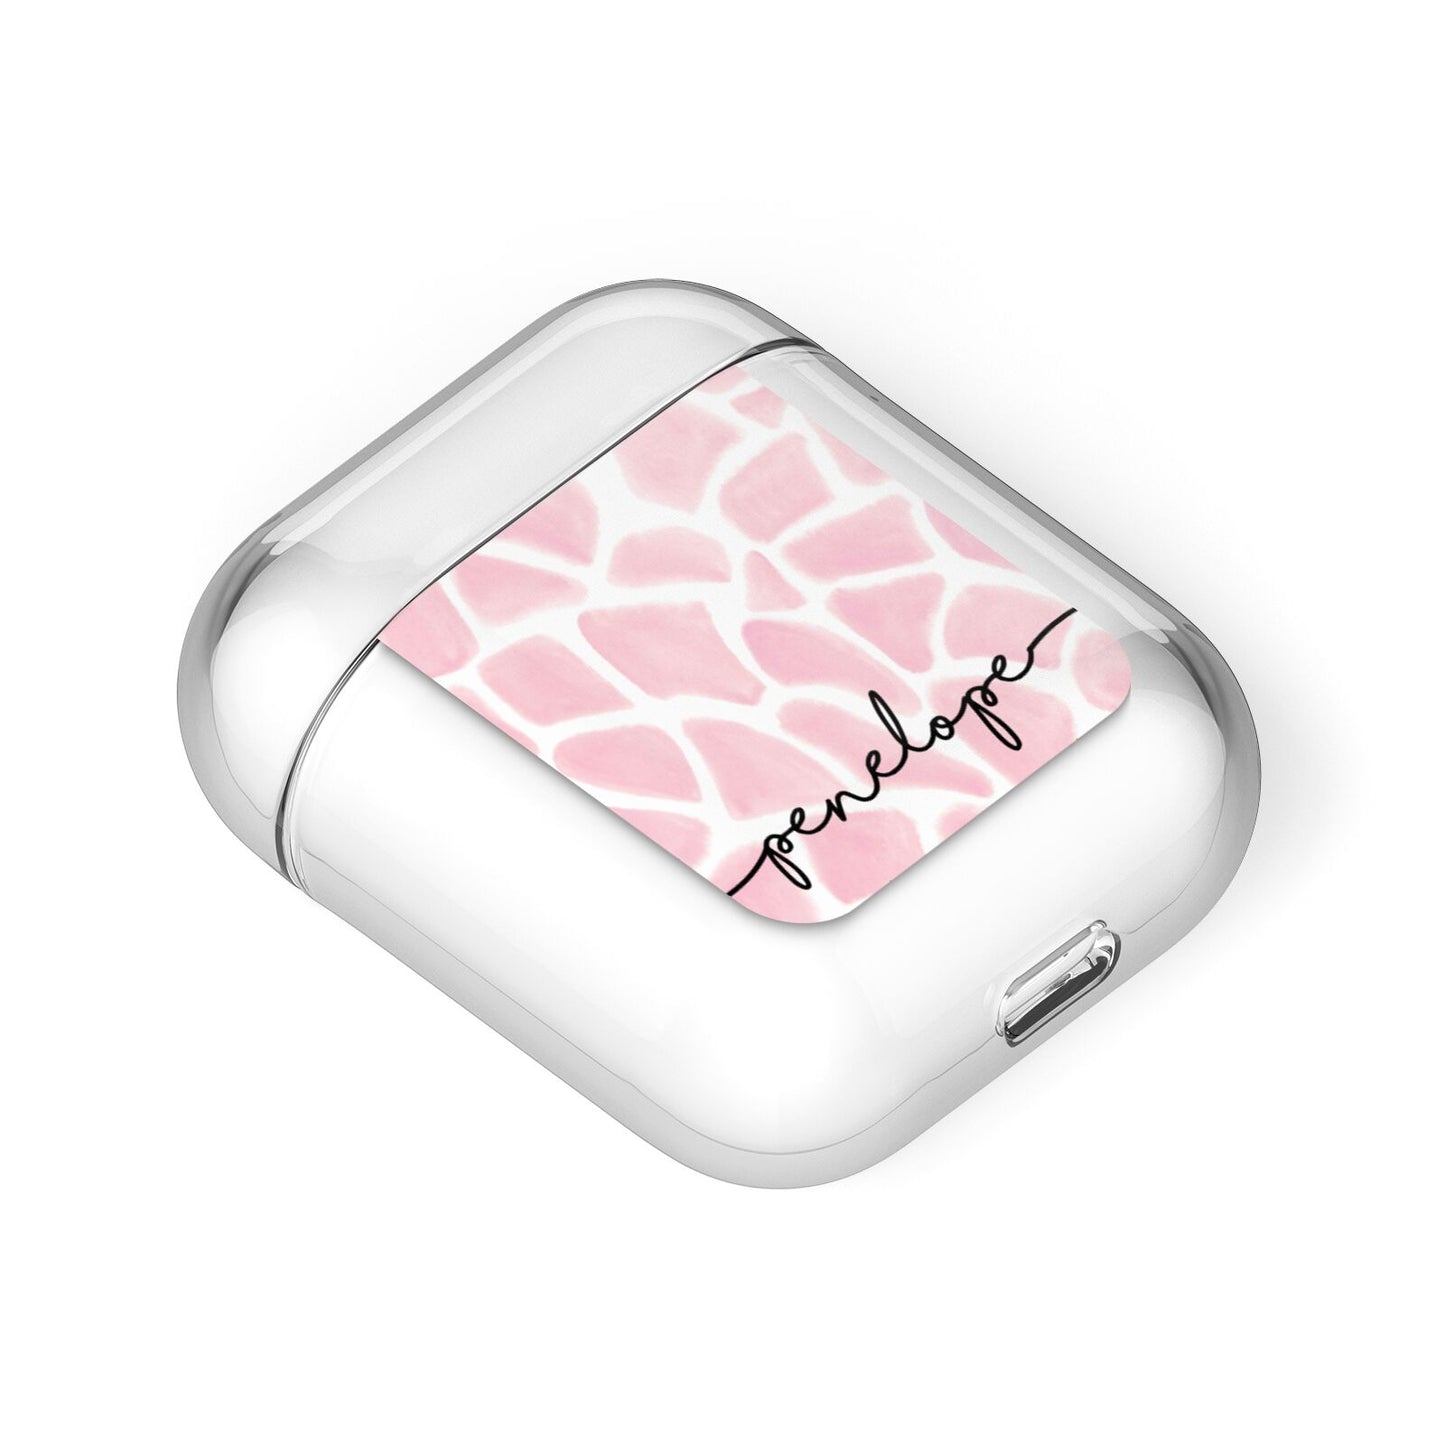 Personalised Pink Giraffe Print AirPods Case Laid Flat